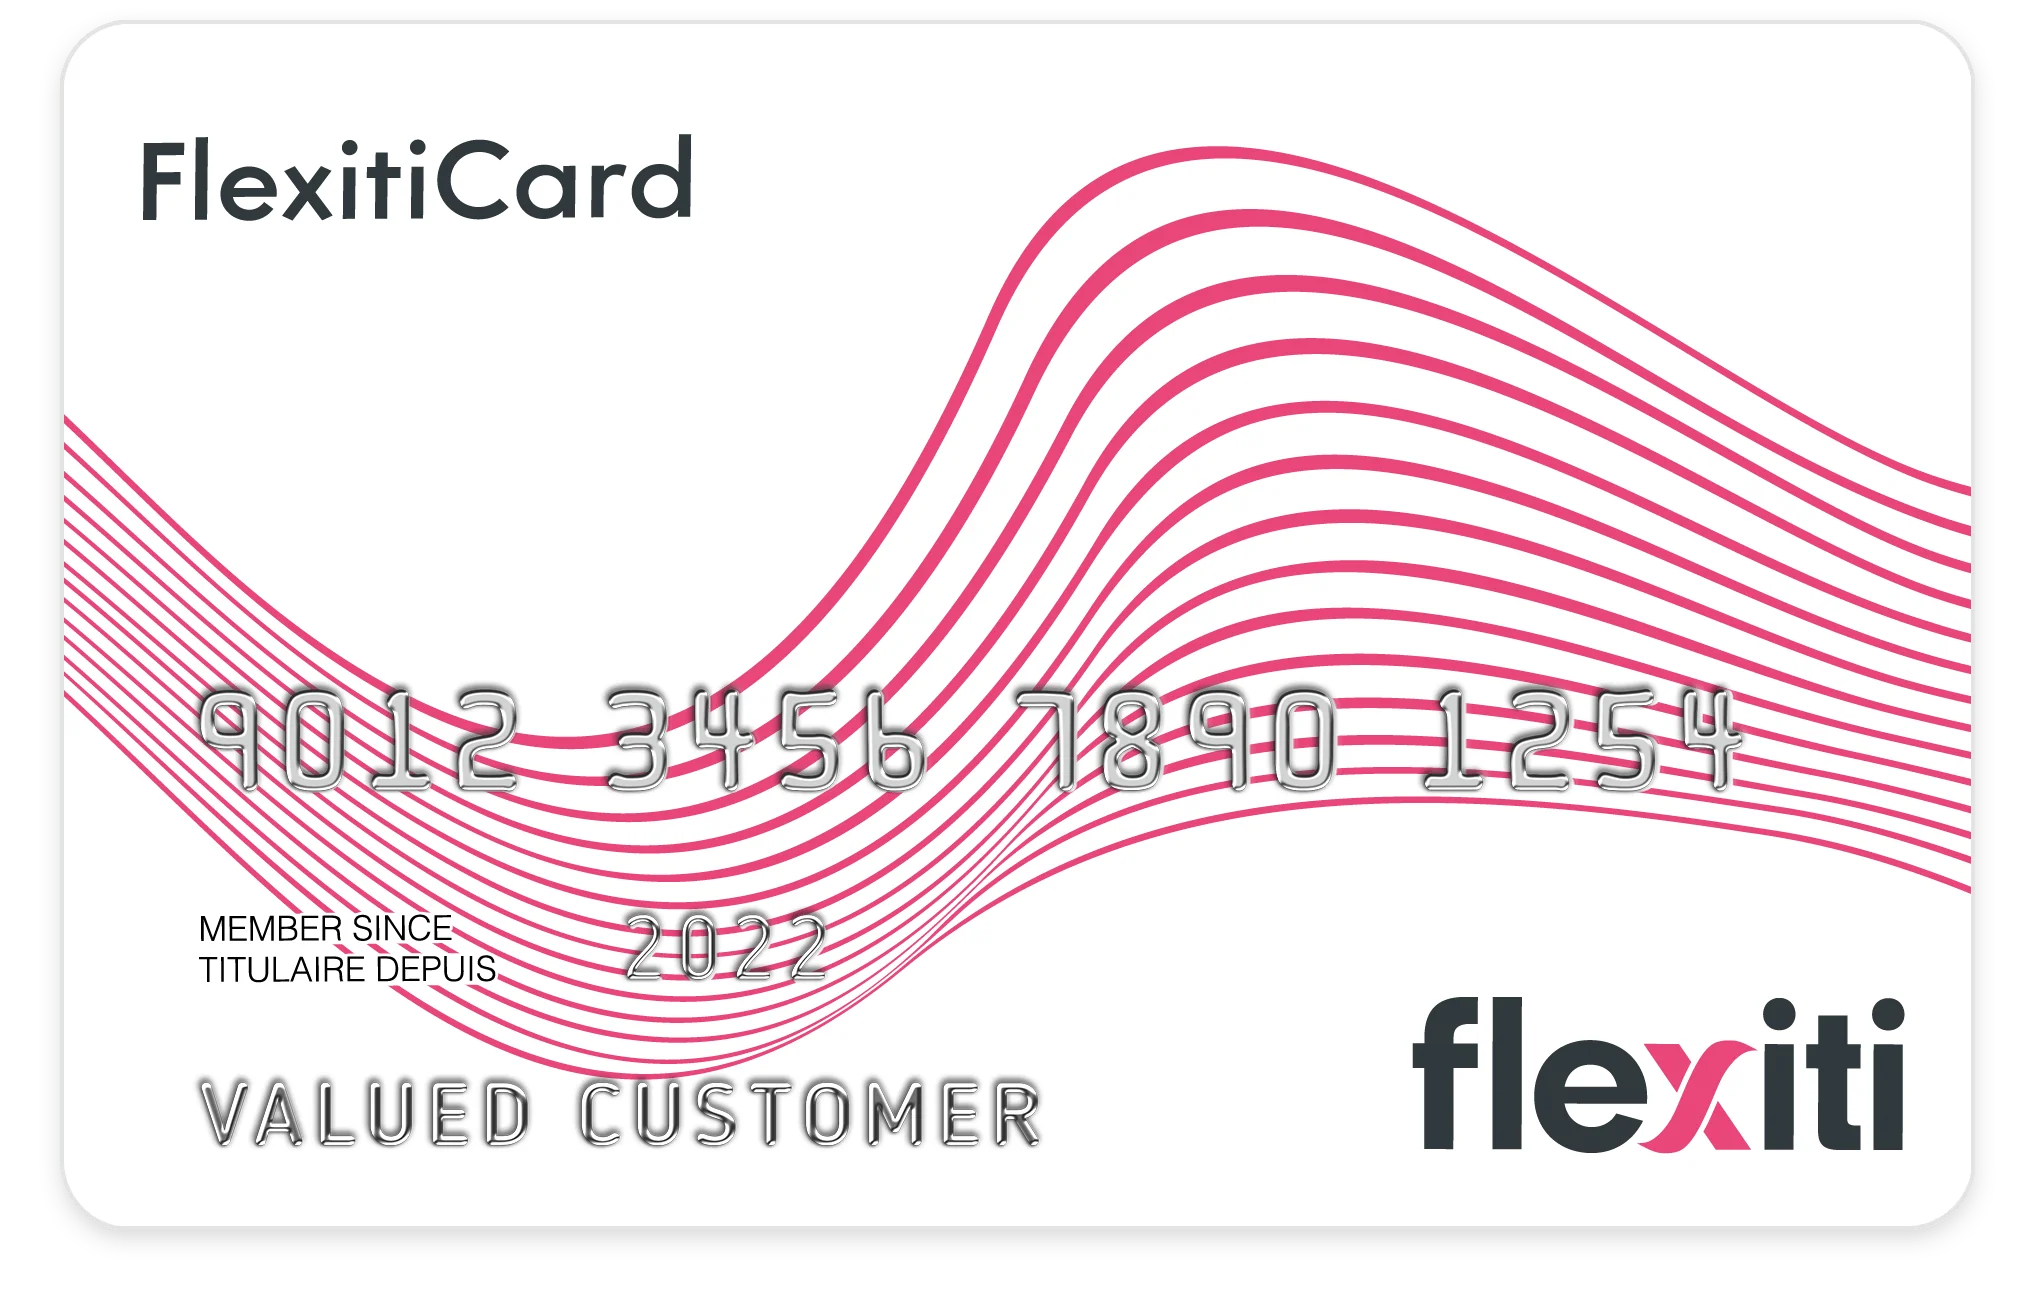 Flexiti Card for auto repairs and tires